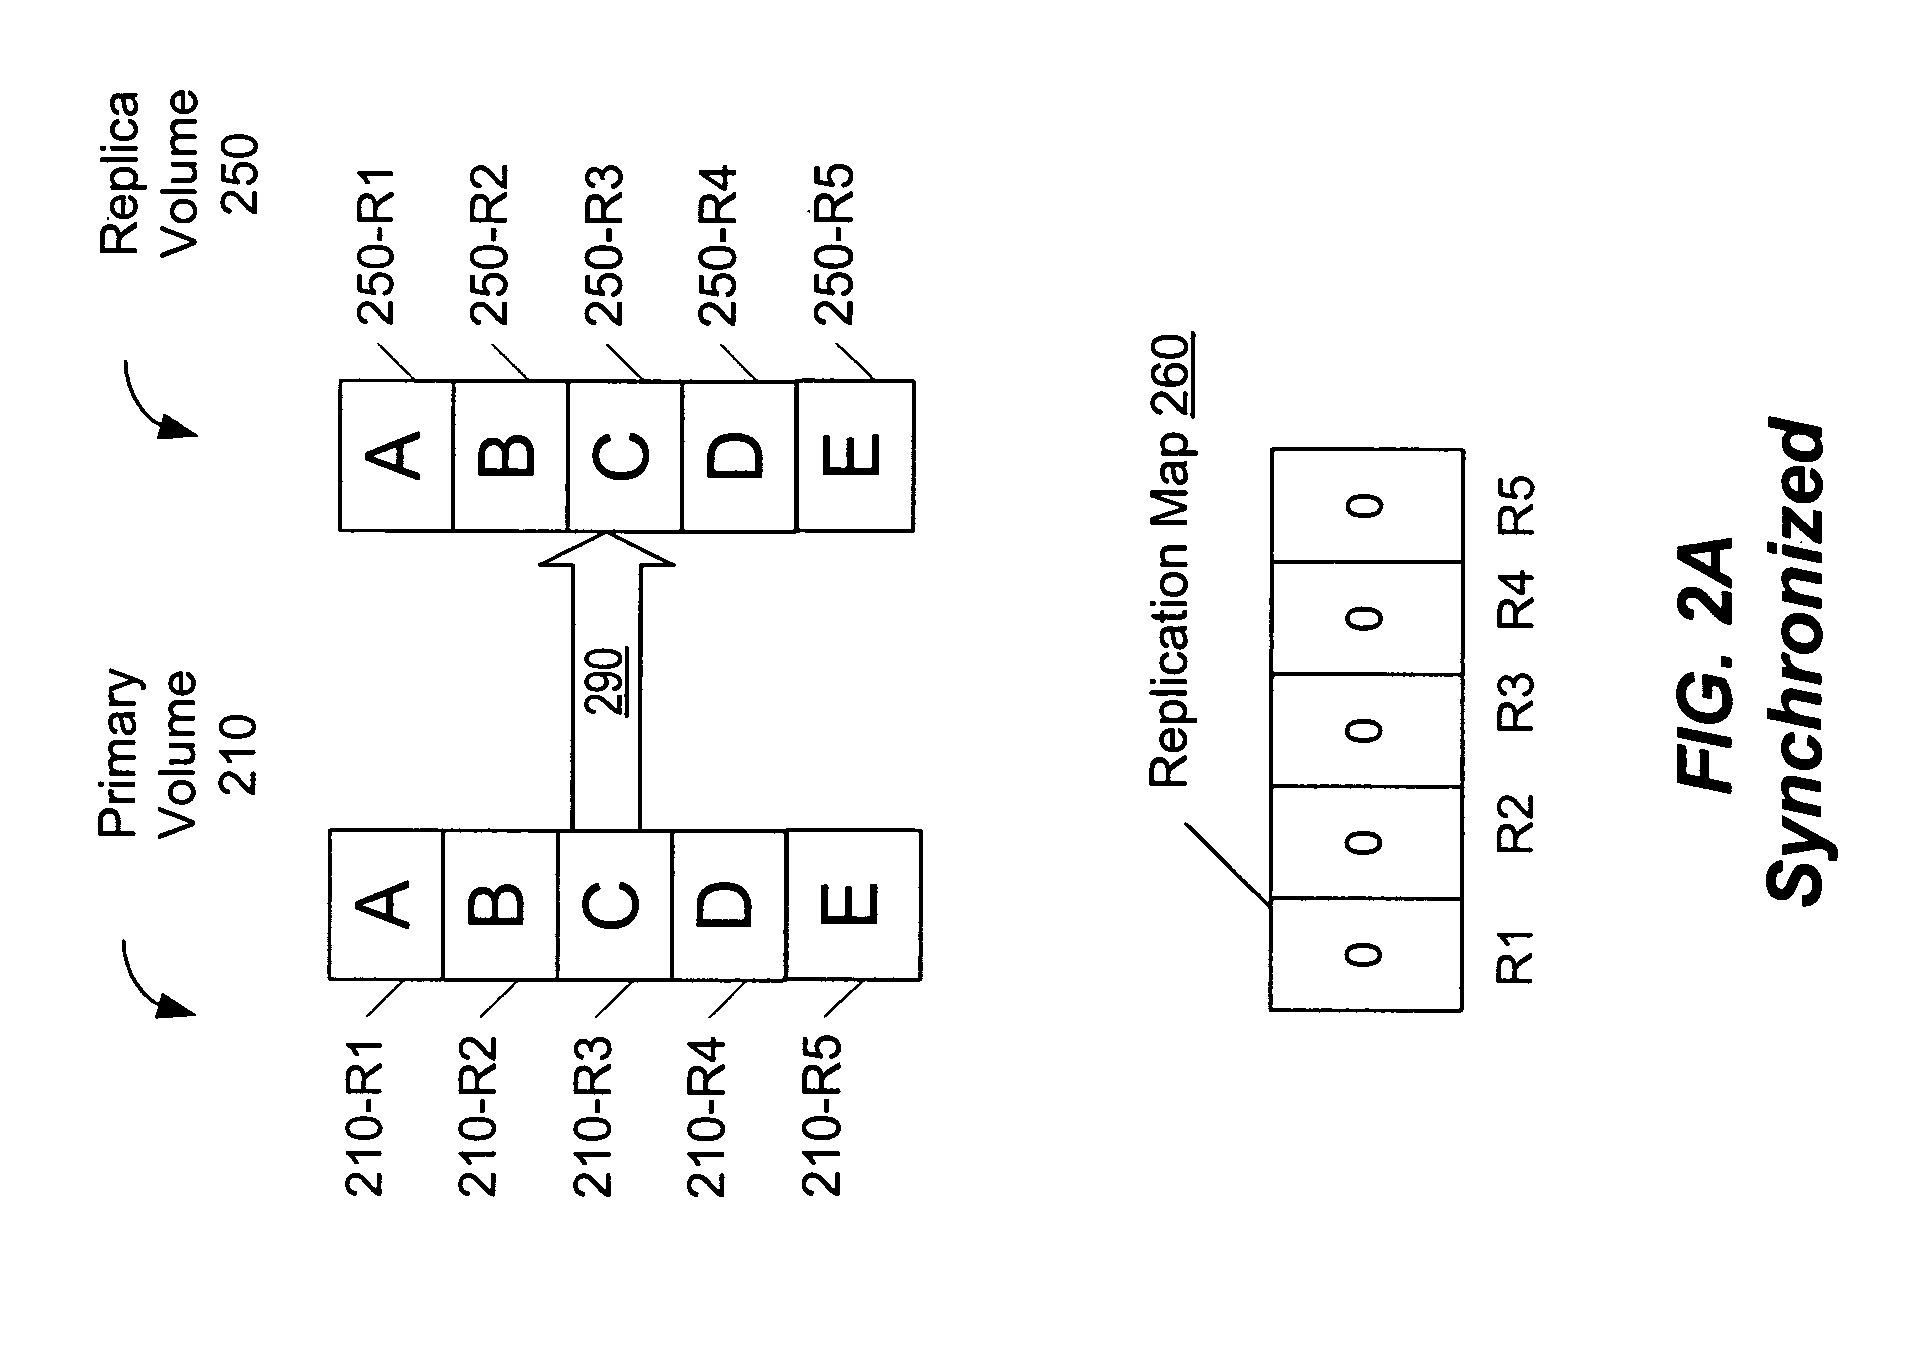 Propagating results of a volume-changing operation to replicated nodes